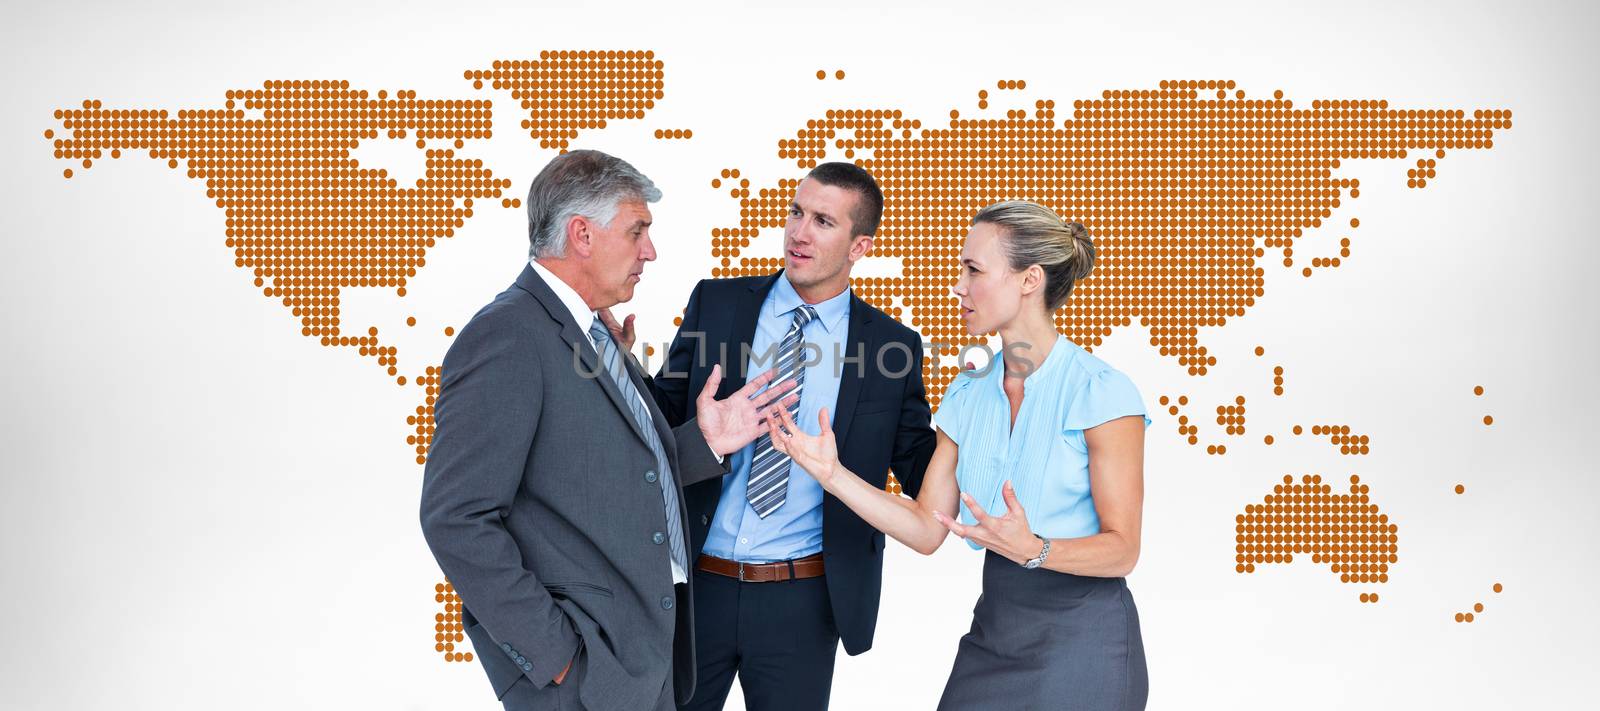 Business people having a disagreement against orange world map on white background